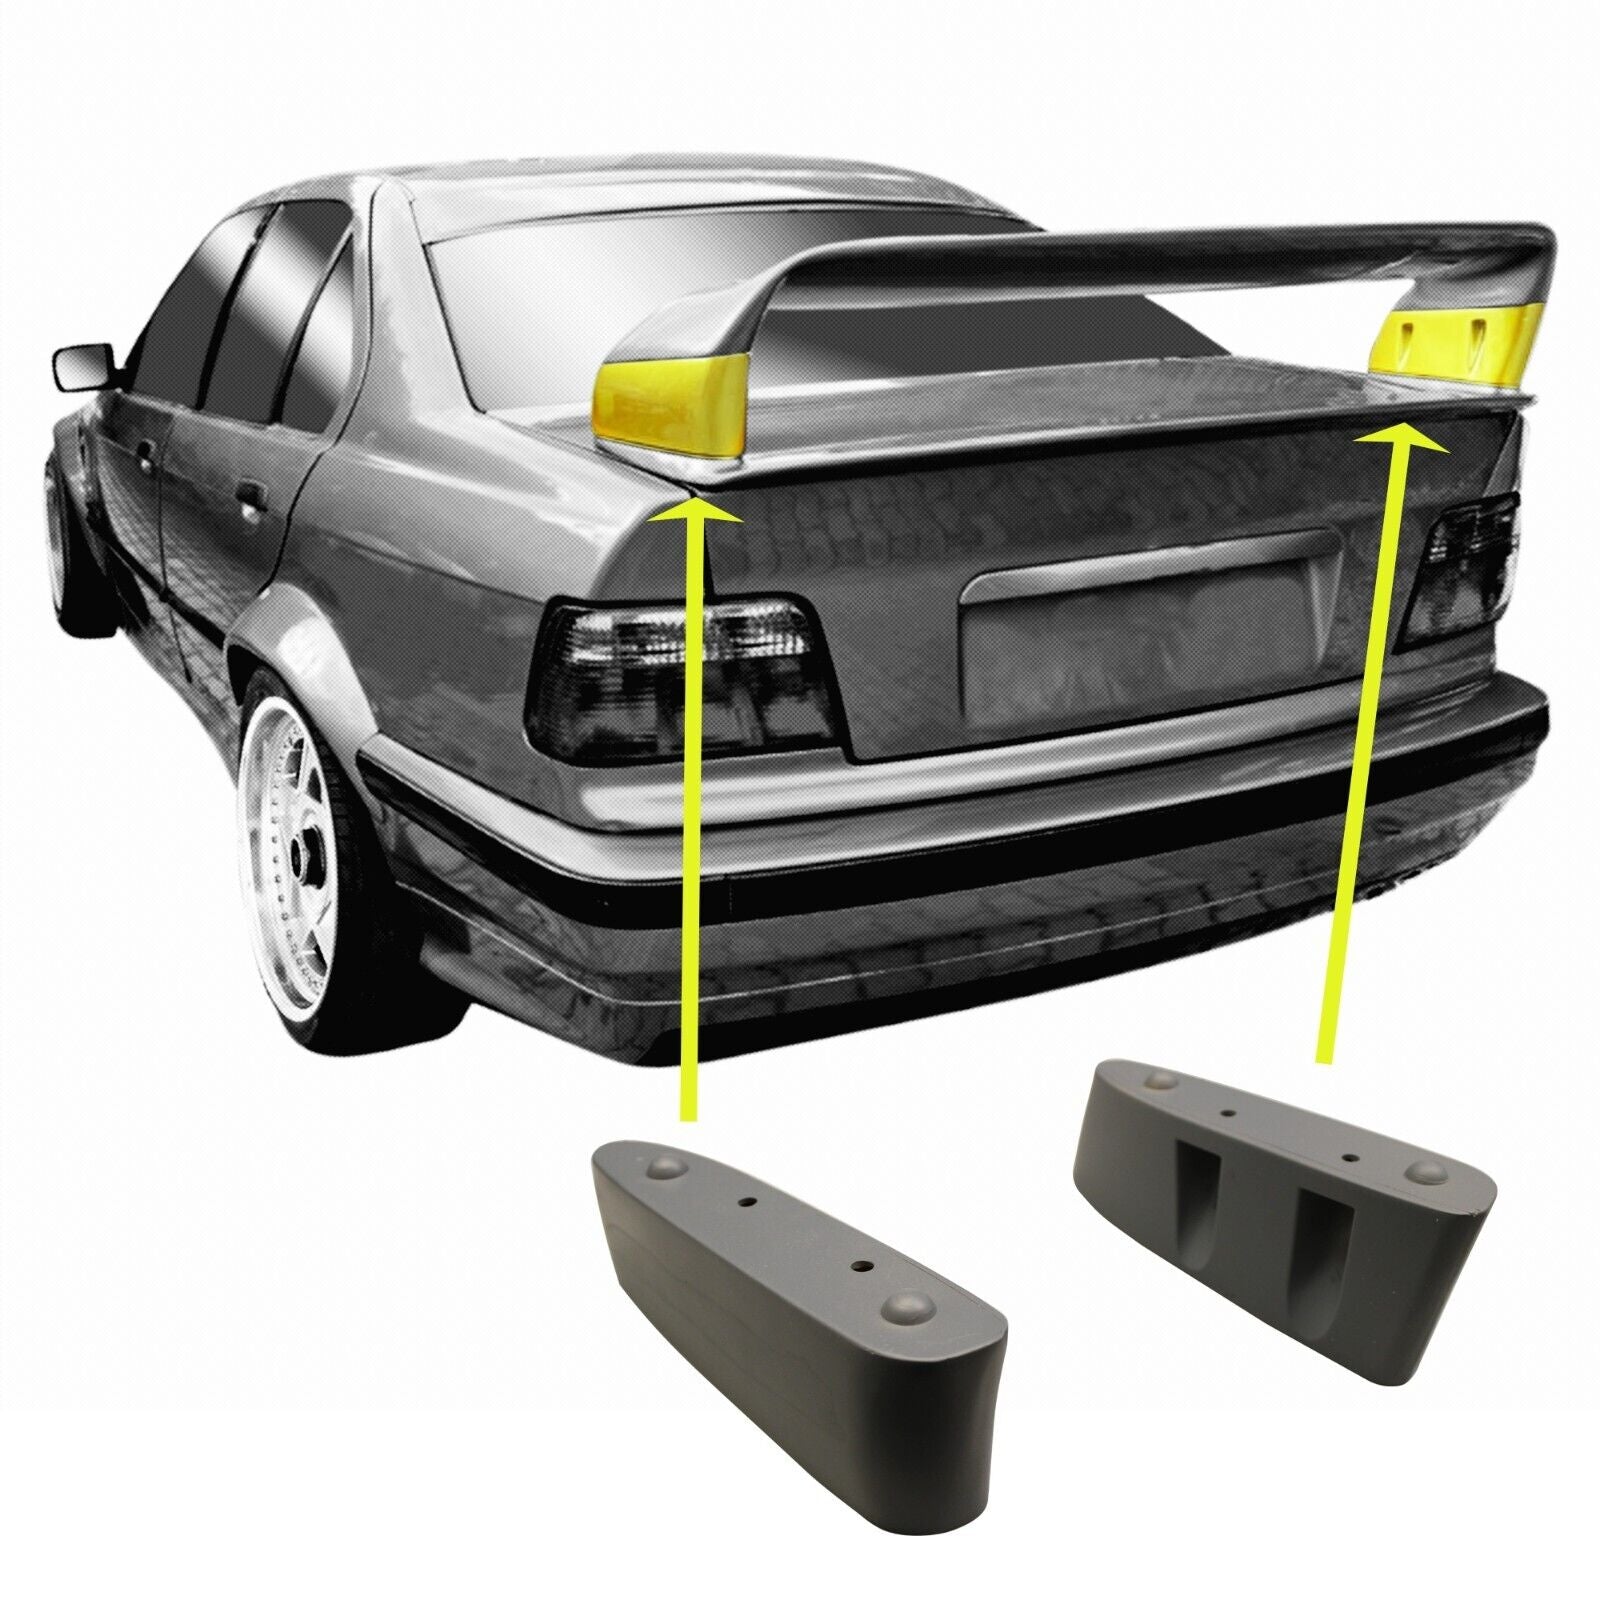 JOM Boot Spoiler Rear Wing extensions for BMW E36 sedan saloon & coupe Aero Kit GT M3